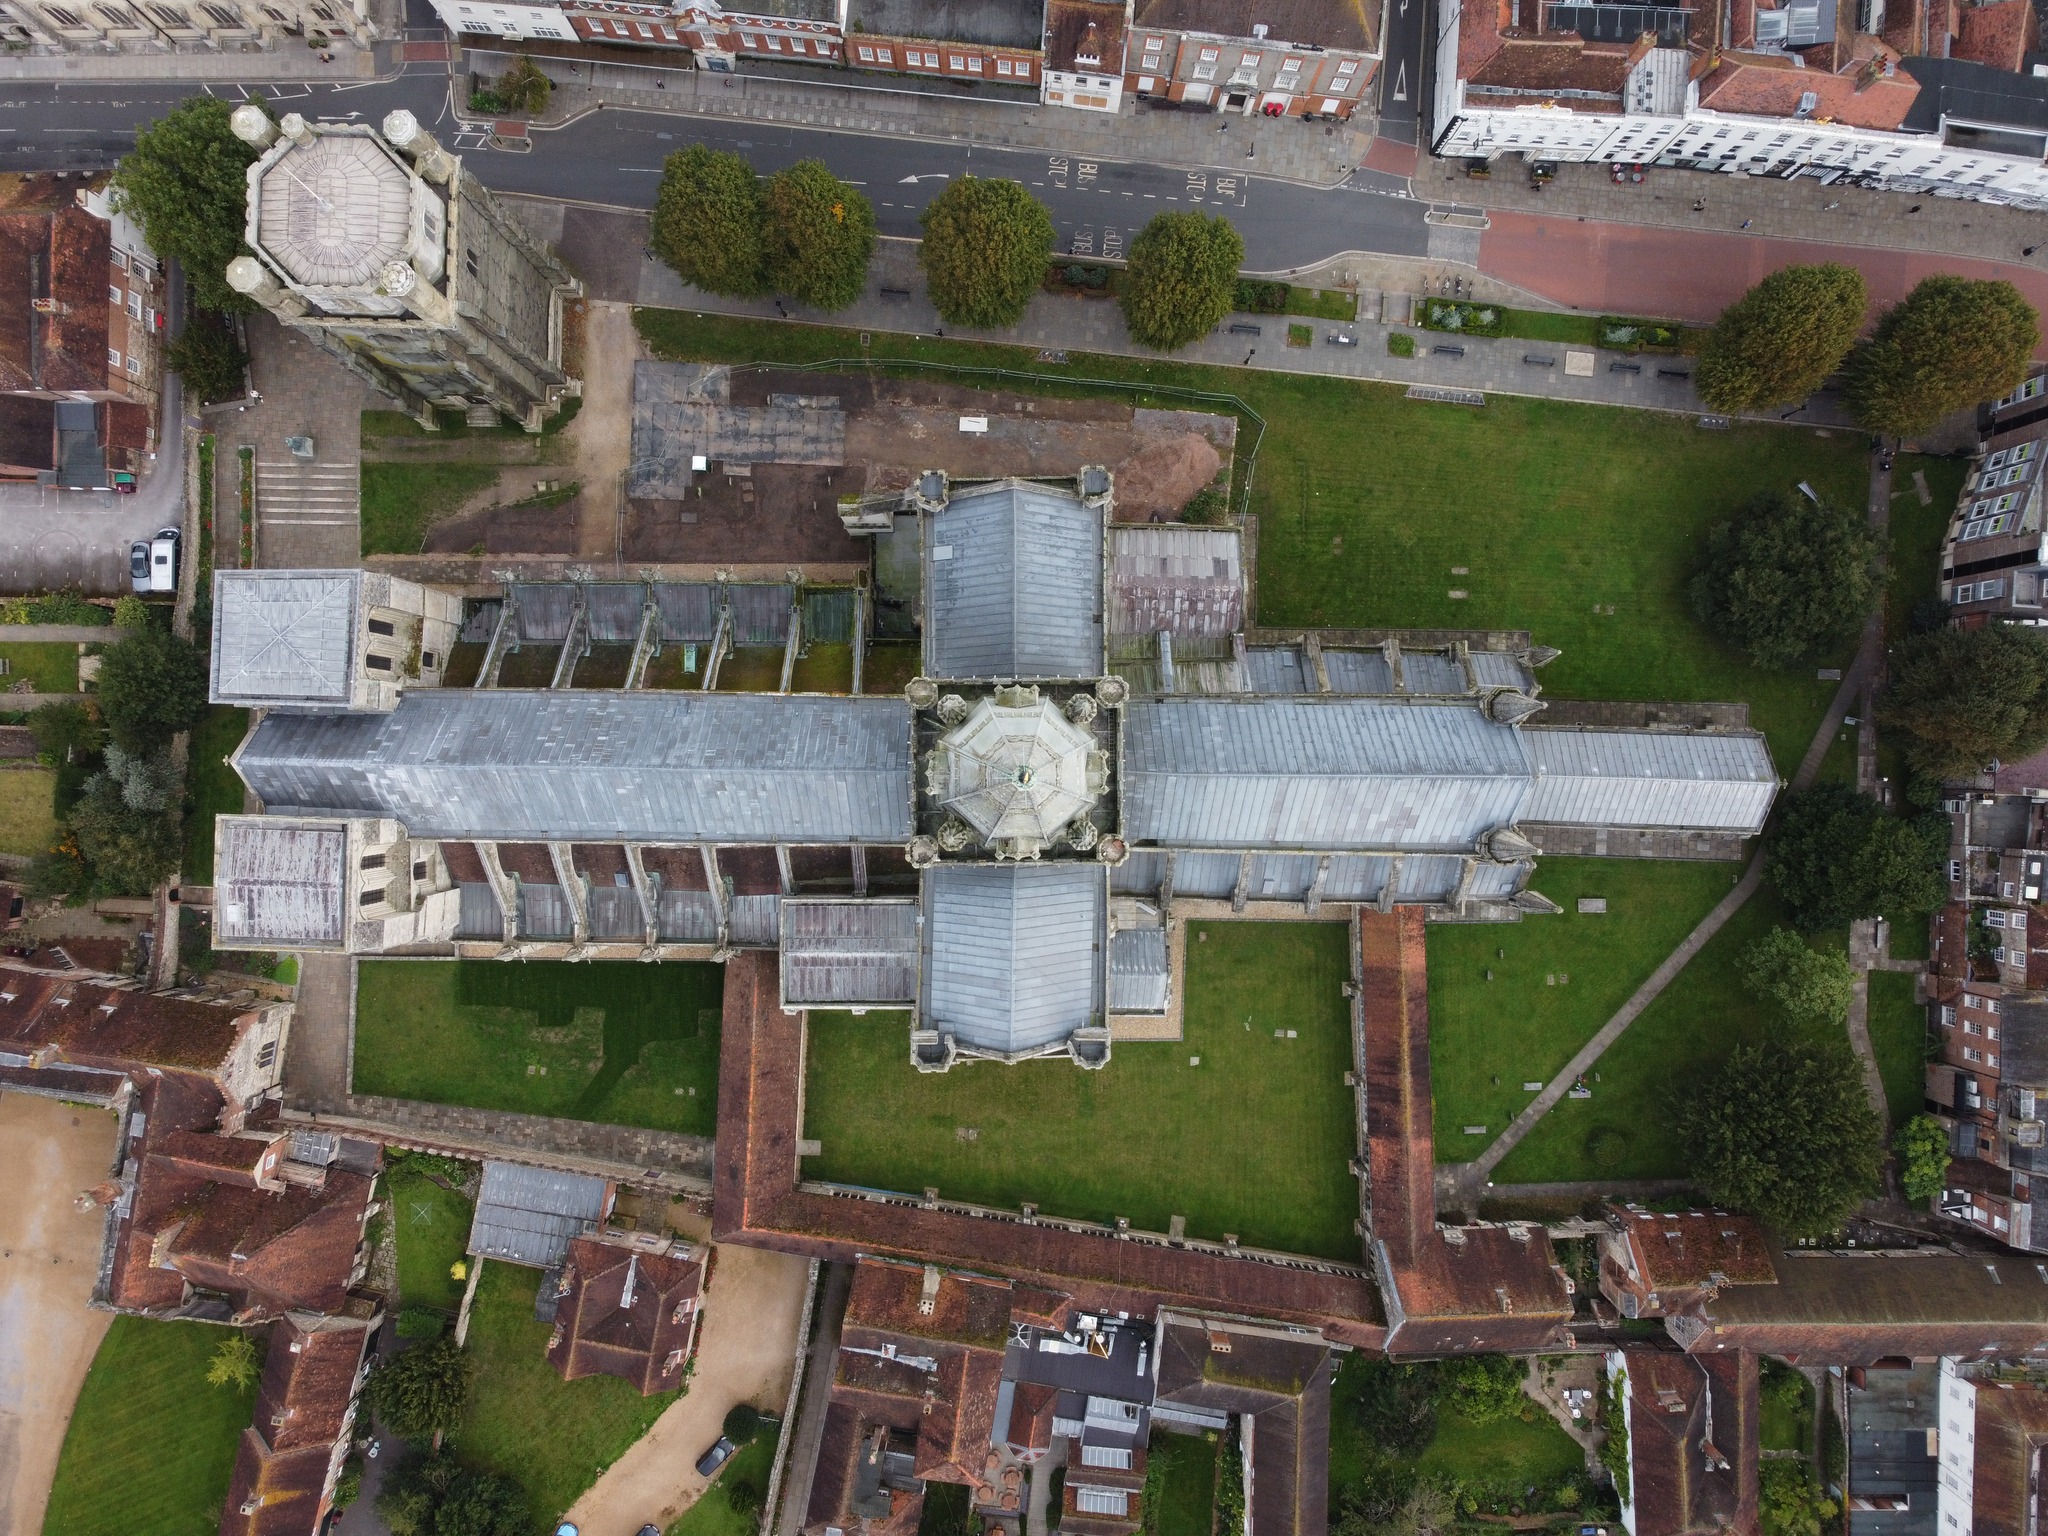 Drone birds-eye view of Chichester Cathedral with lead roofing